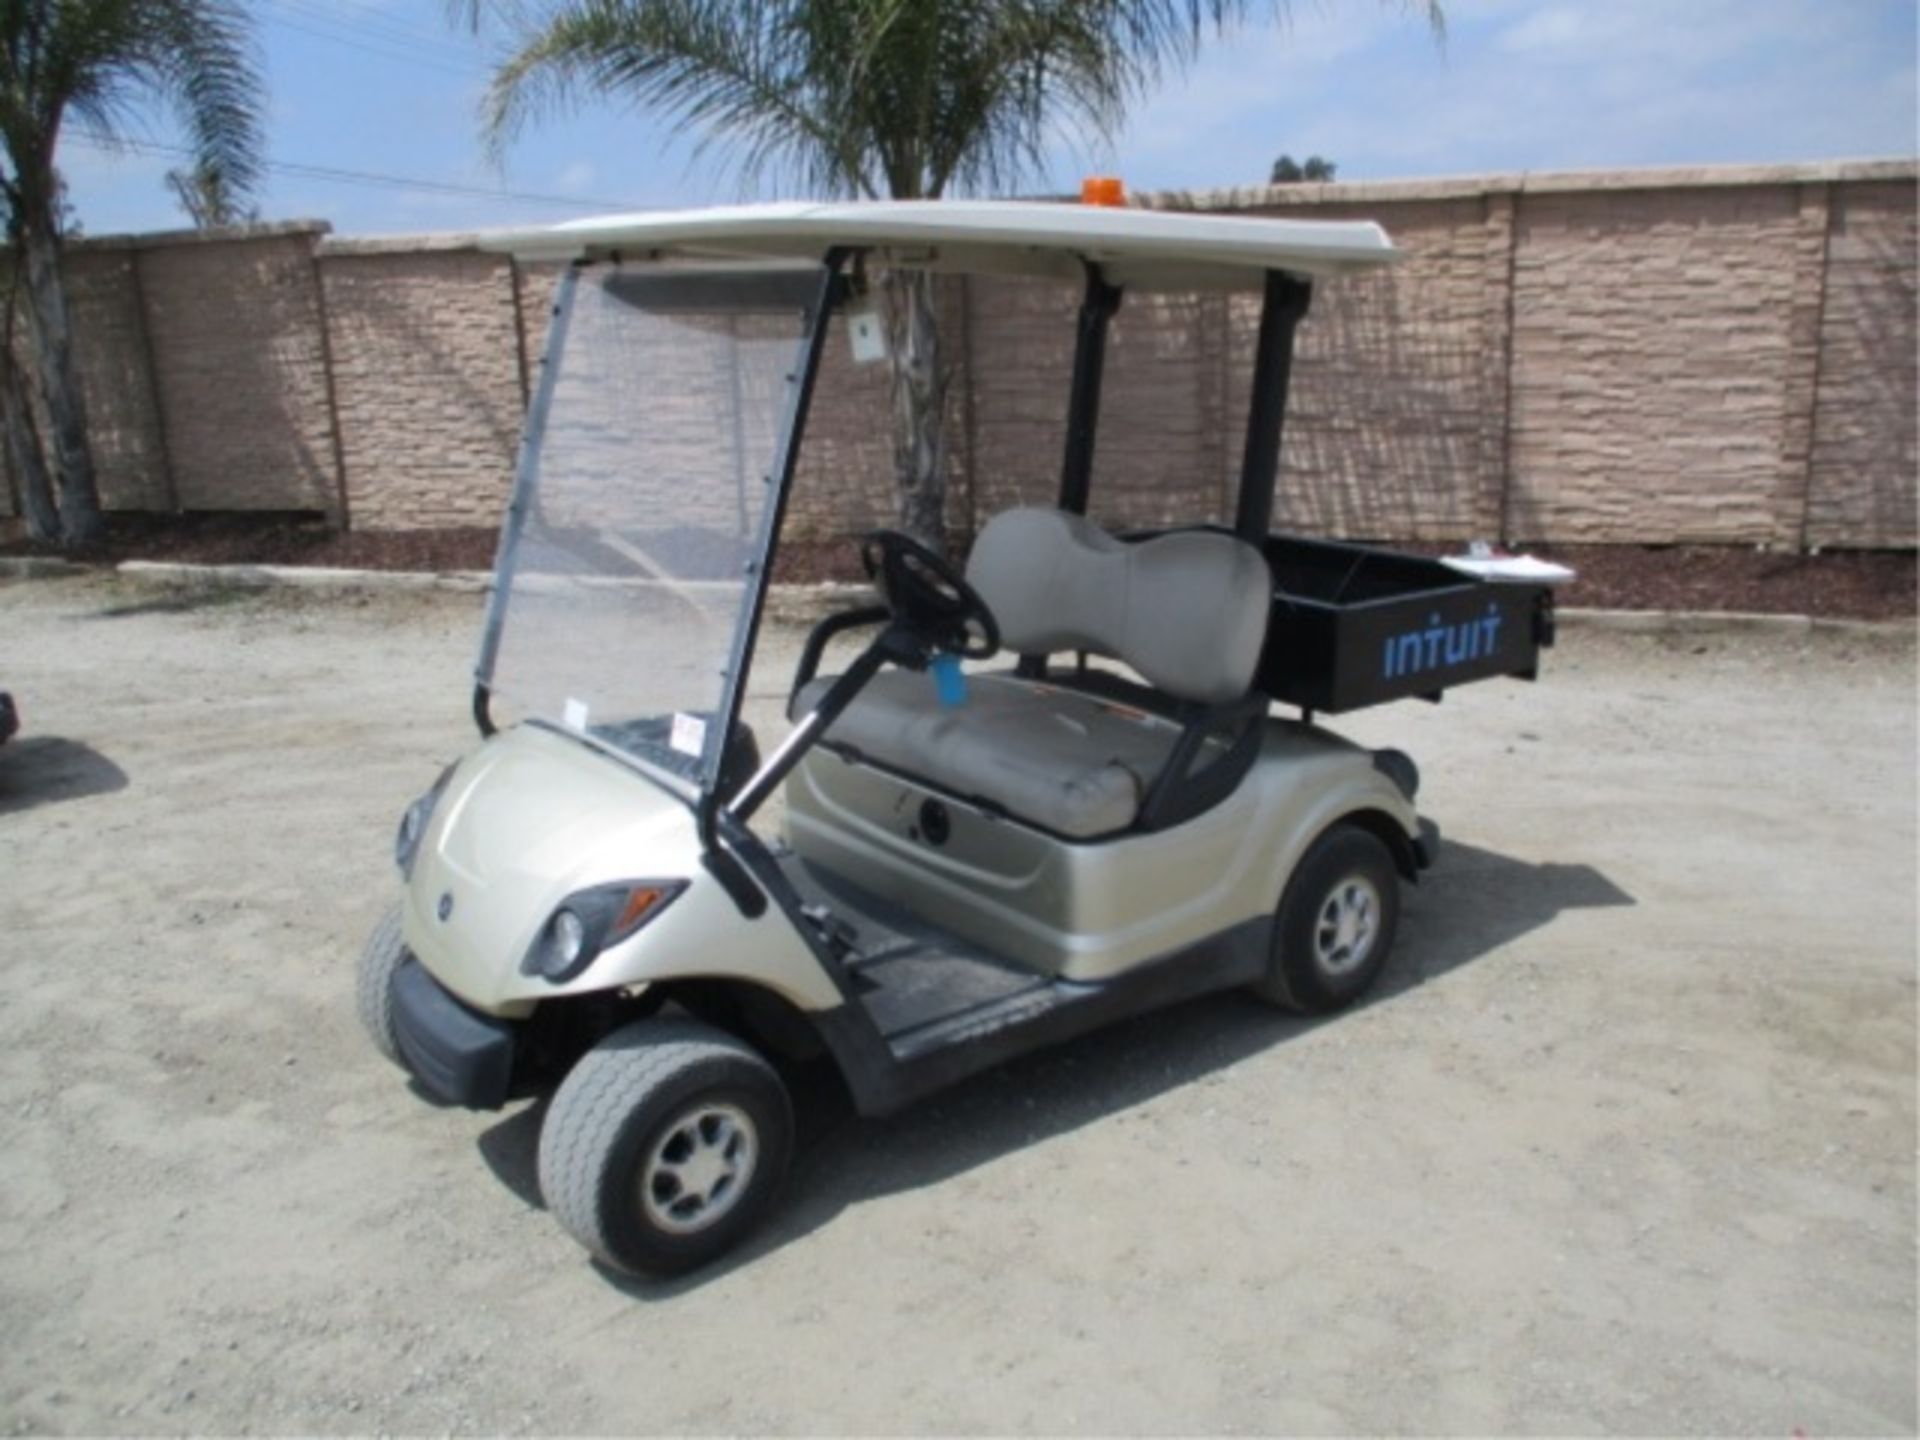 Yamaha Utility Golf Cart, Electric, Rear Metal Bed, Canopy, Includes Charger, S/N: JW1-F423610 - Image 3 of 24